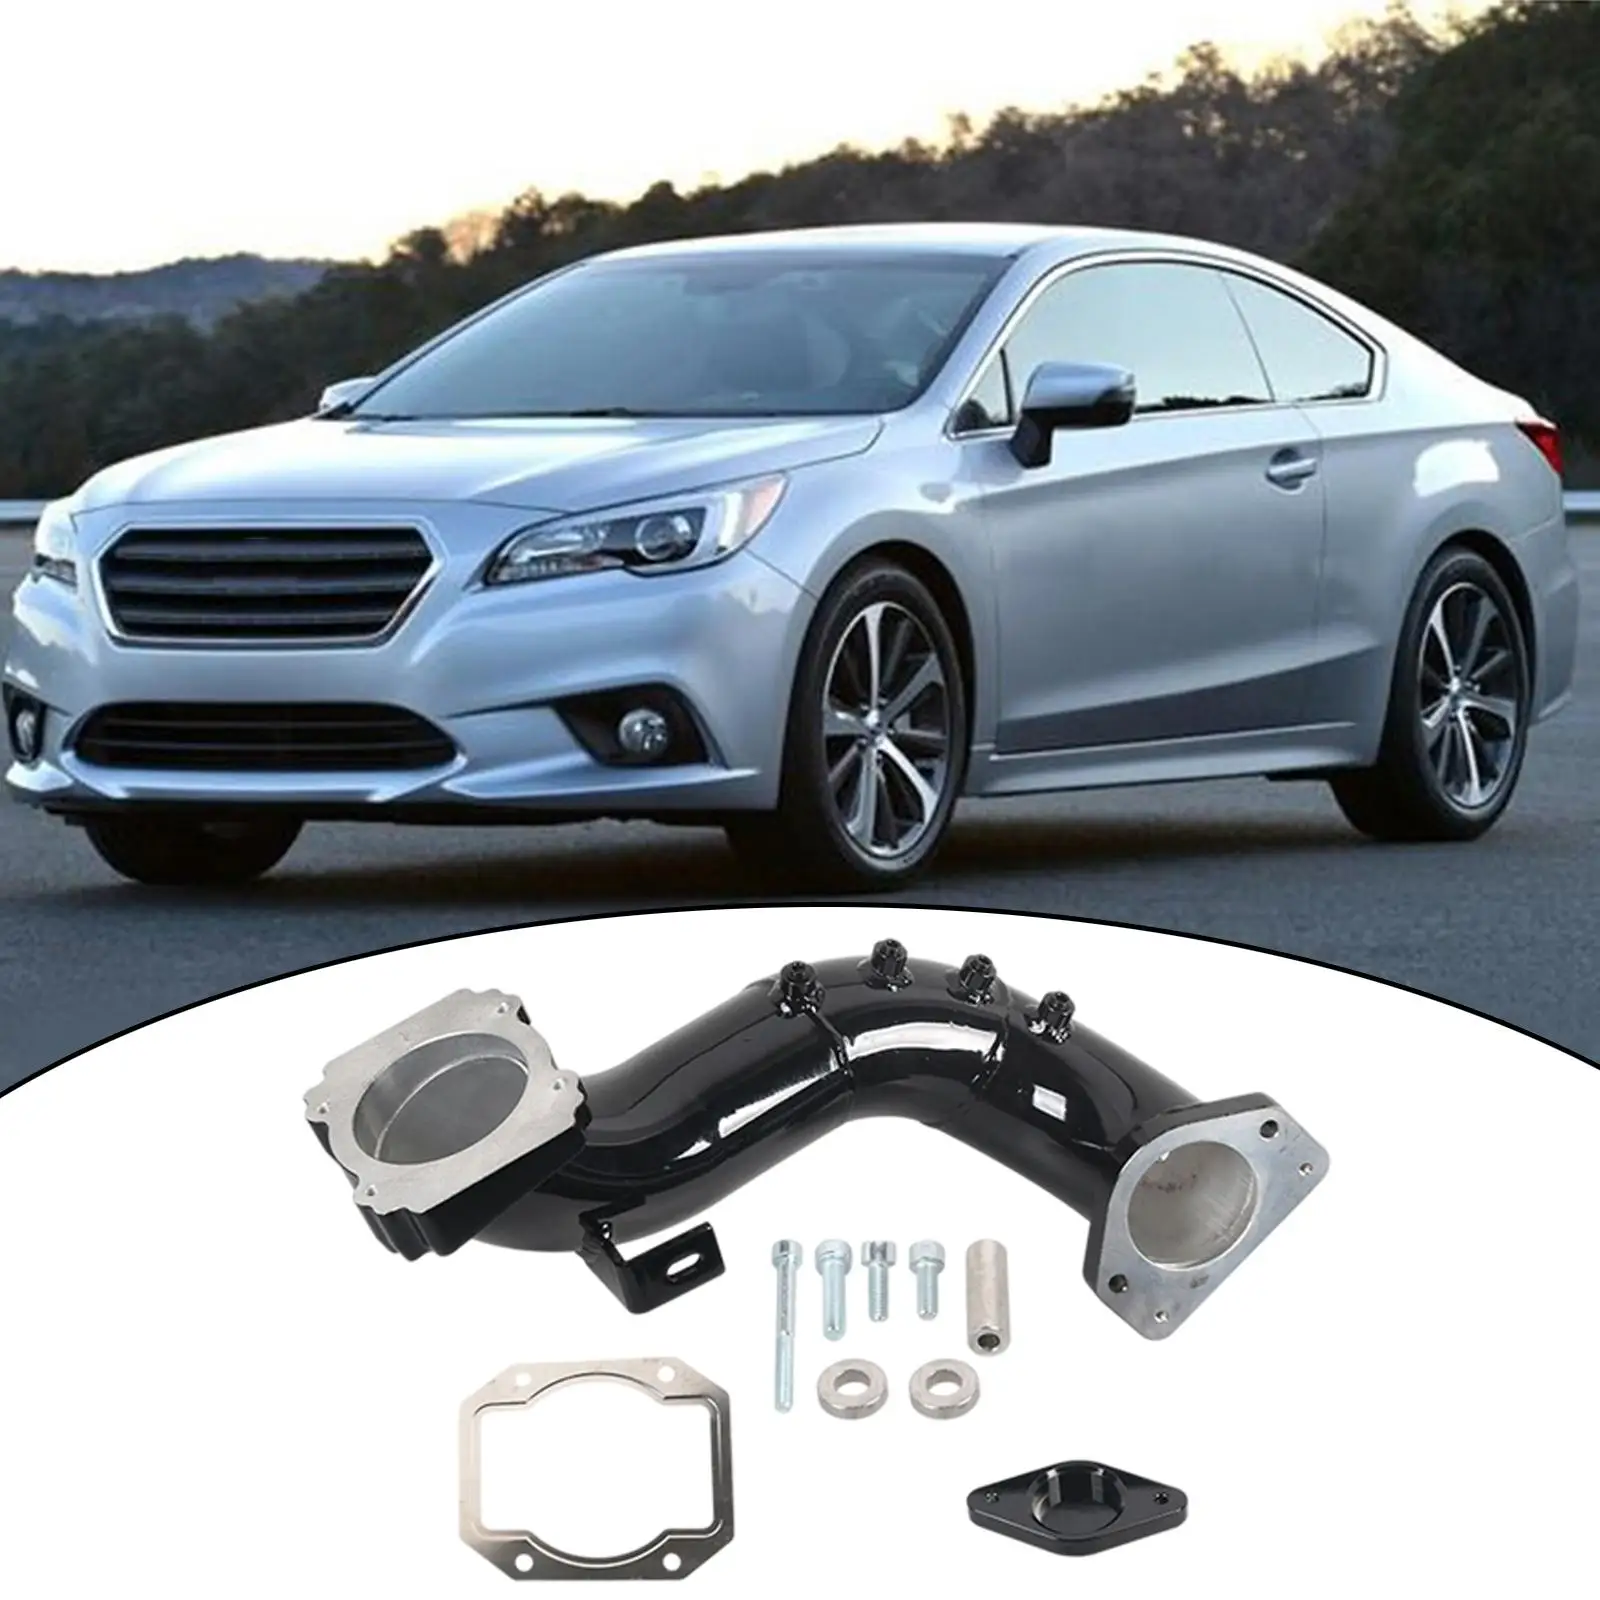 Car Valve Cooler & Intake Tube Bridge Kit for Chevy 2500 3500 6.6l LML Meet the quality standards, tested before shipment